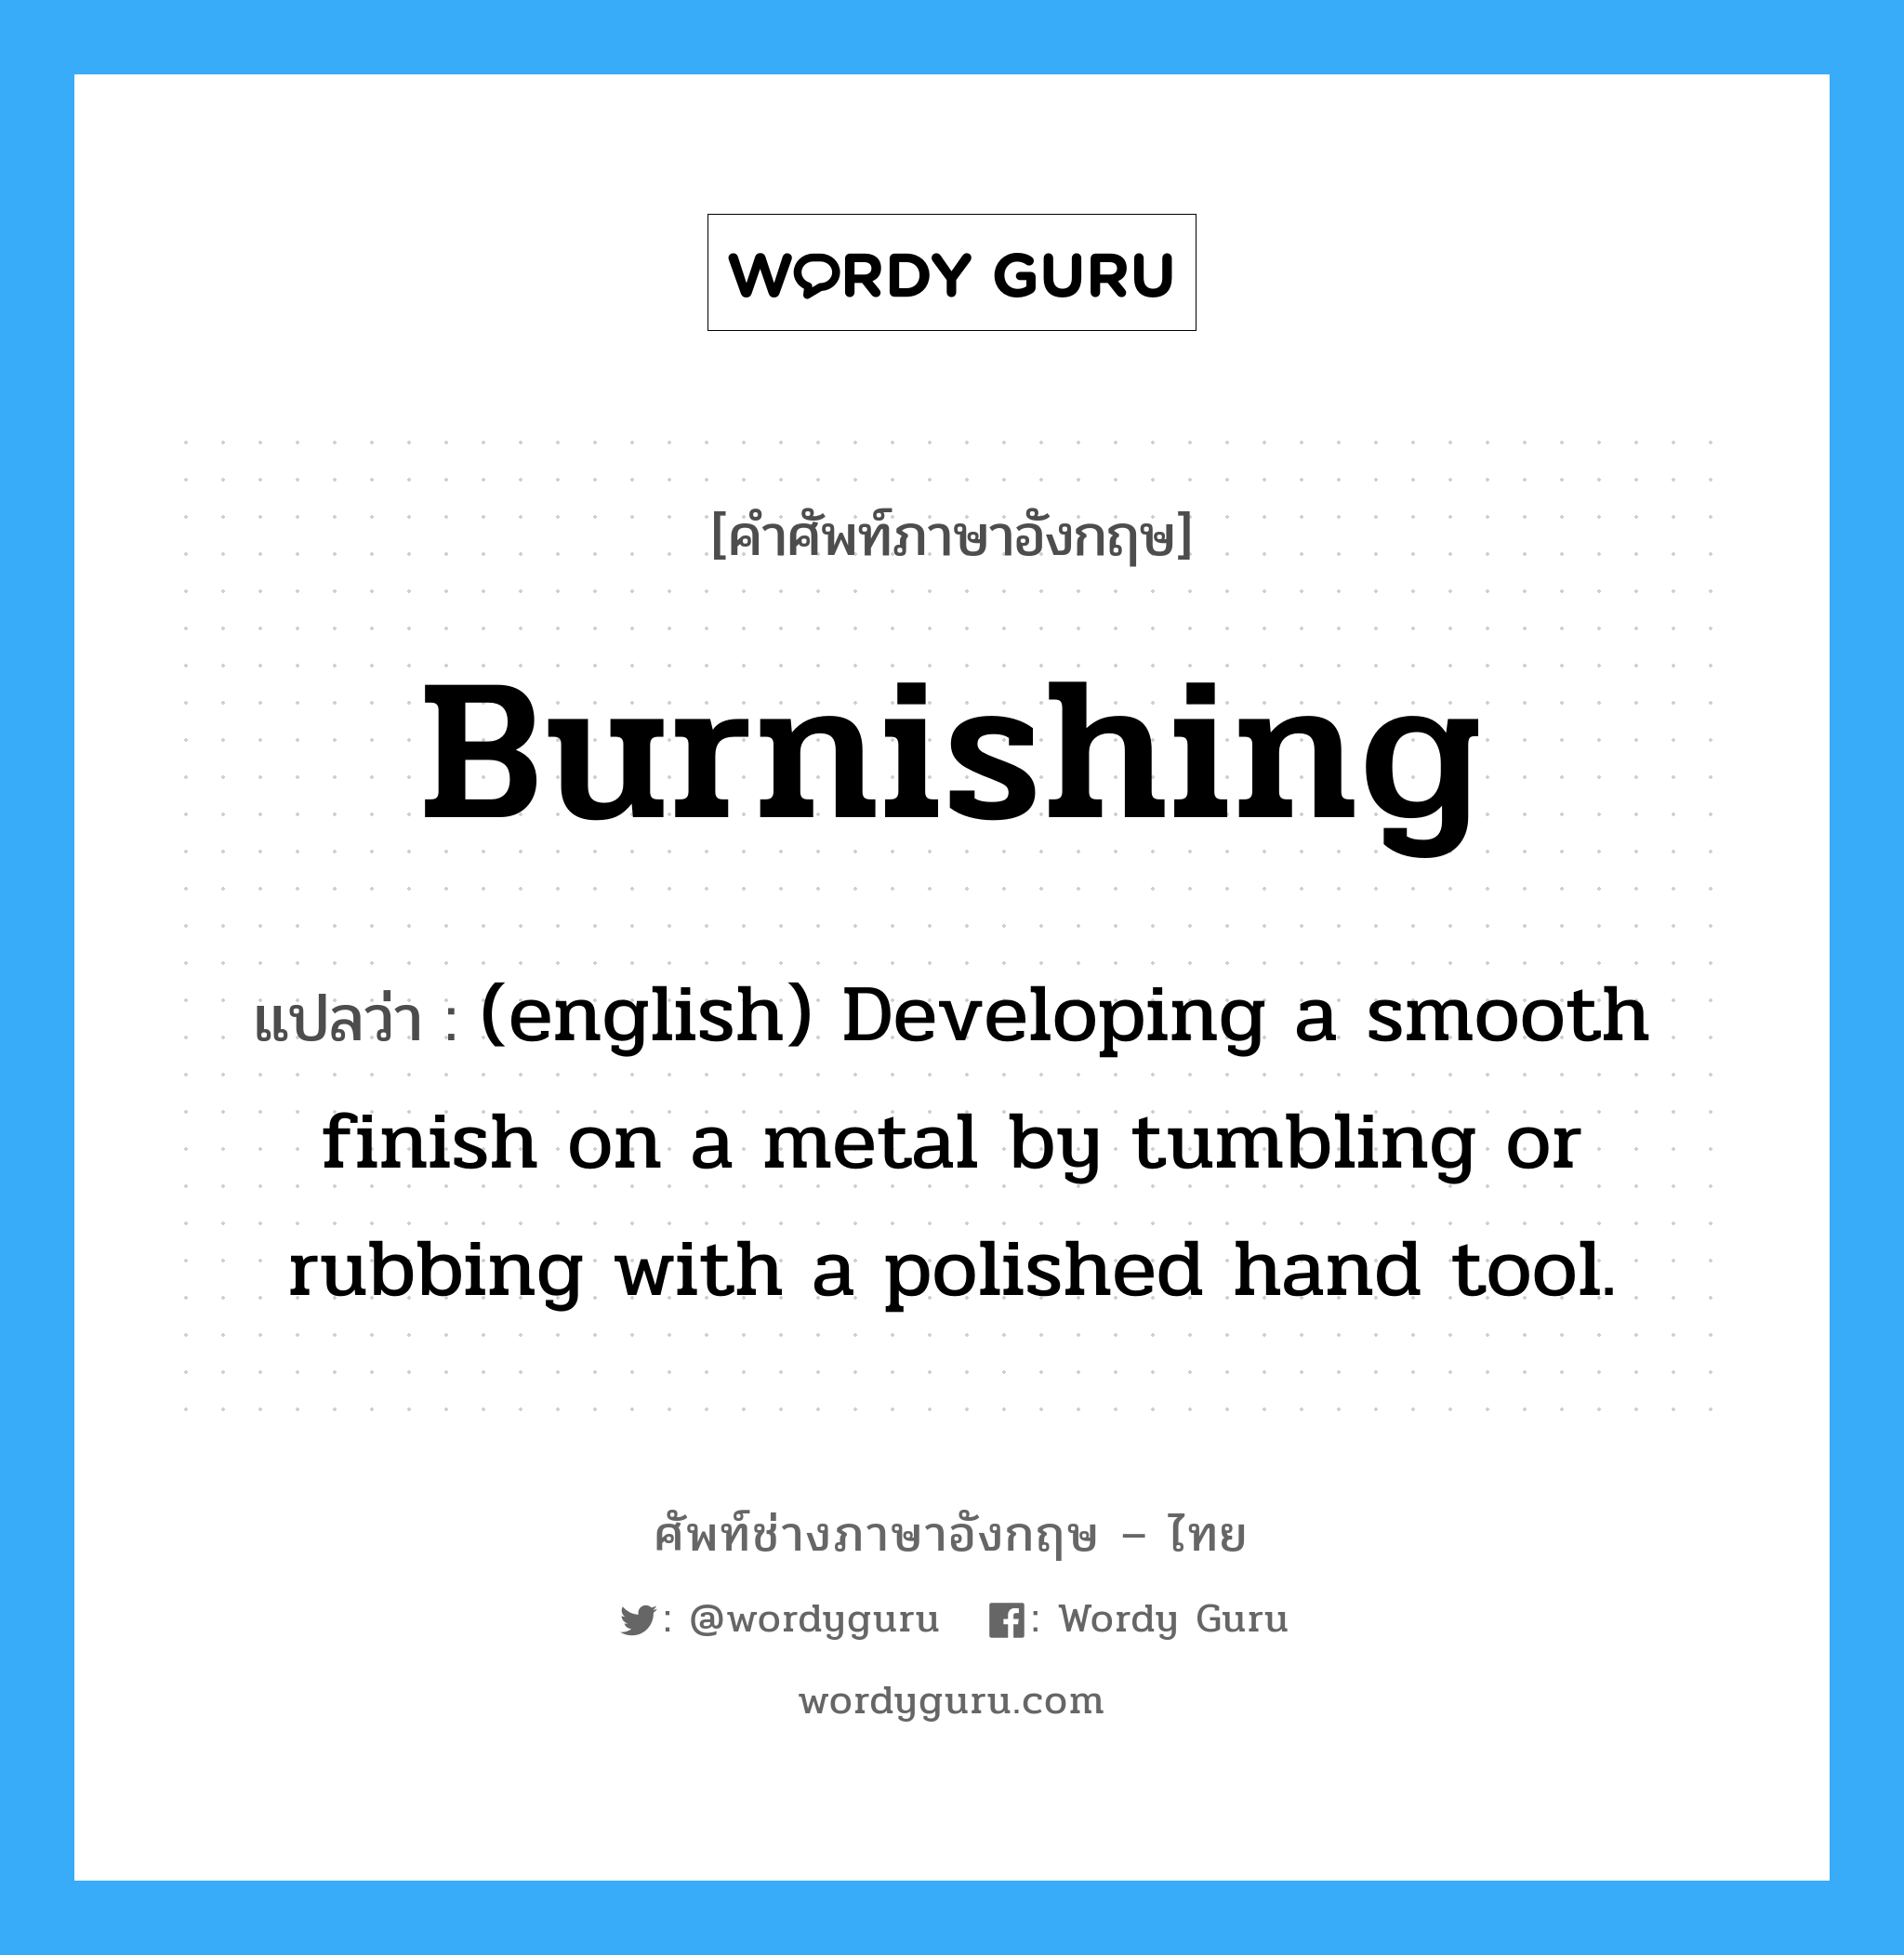 Burnishing แปลว่า?, คำศัพท์ช่างภาษาอังกฤษ - ไทย Burnishing คำศัพท์ภาษาอังกฤษ Burnishing แปลว่า (english) Developing a smooth finish on a metal by tumbling or rubbing with a polished hand tool.